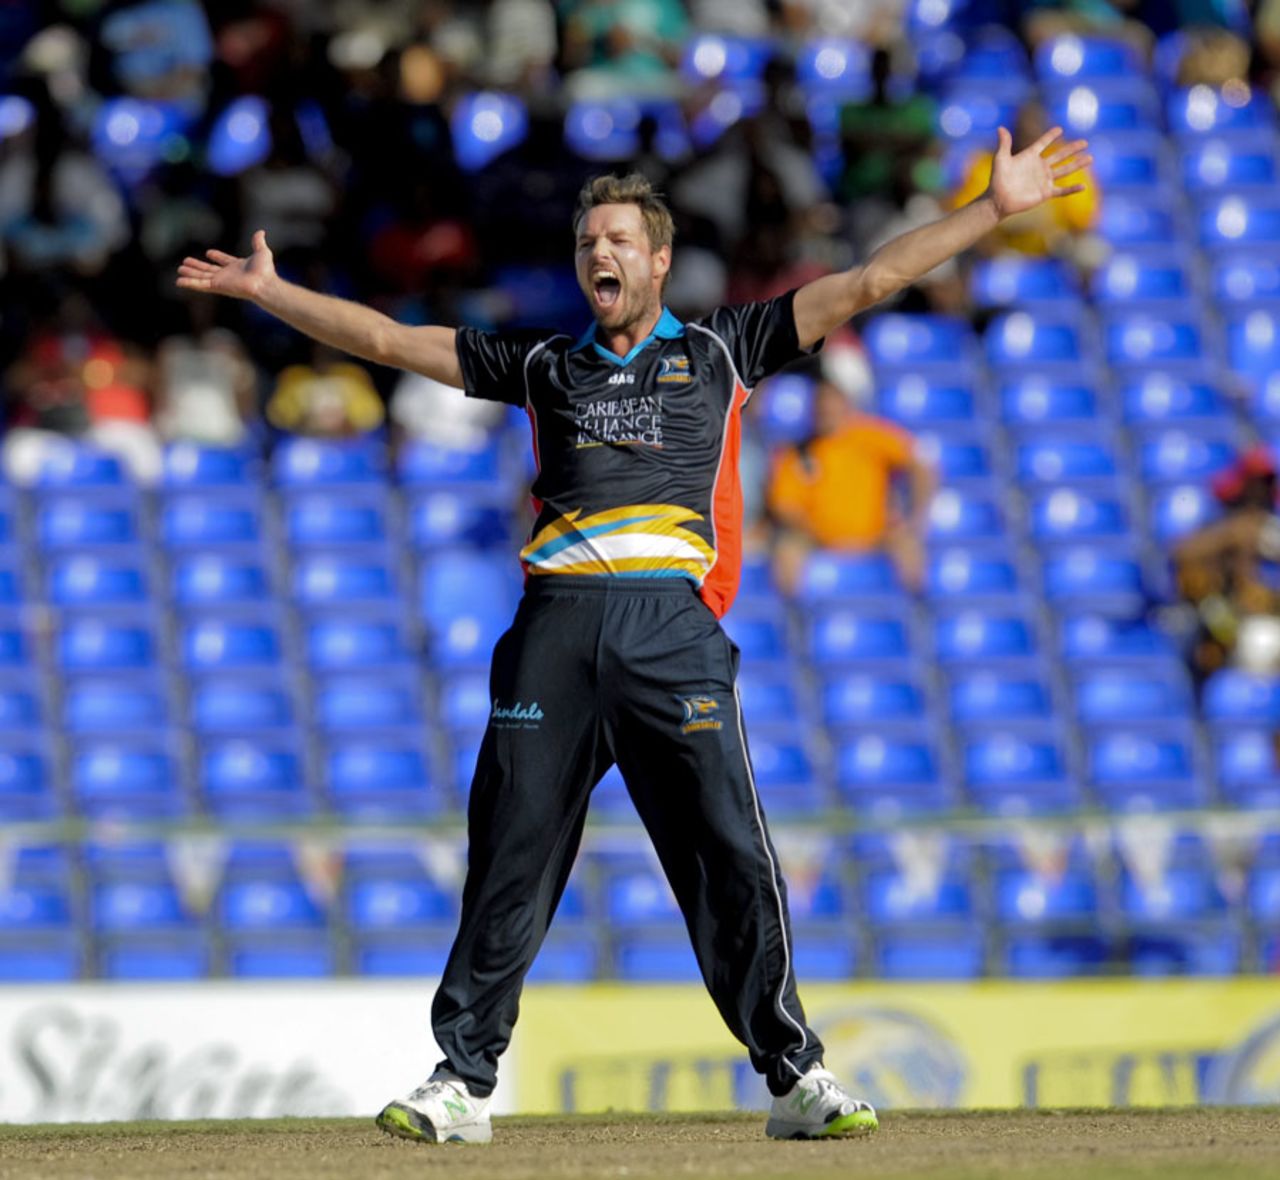 Ben Laughlin took 3 for 7 in his three overs, Antigua Hawksbills v T&T Red Steel, CPL 2014, St Kitts, August 9, 2014